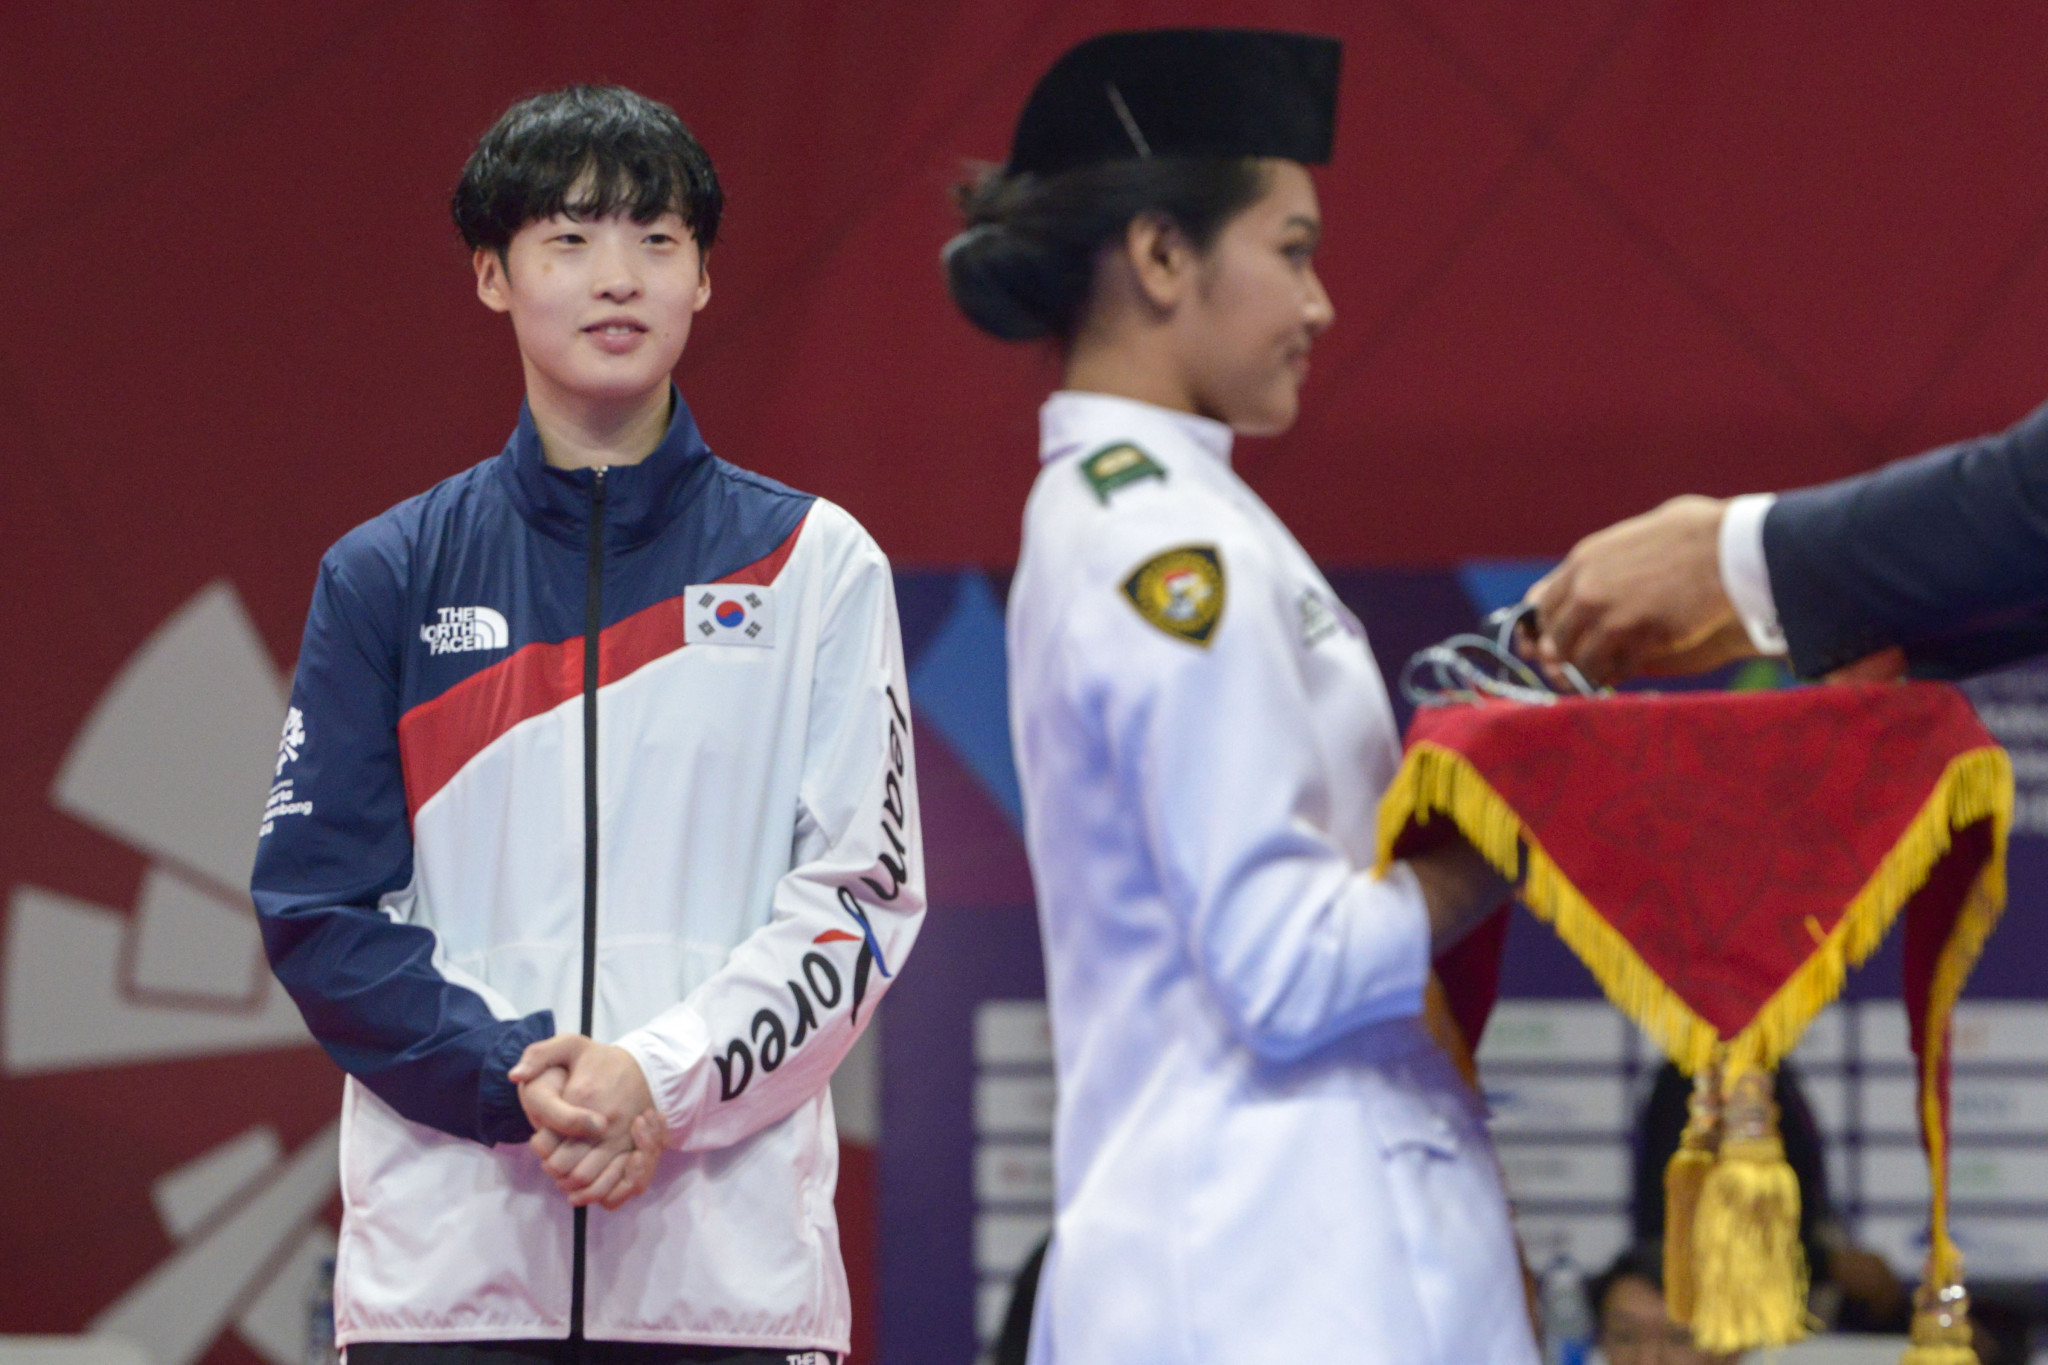 Lee Da-bin was one of South Korea's two gold medallists on the final day of the World Taekwondo Grand Slam Champions Series in Wuxi ©Getty Images